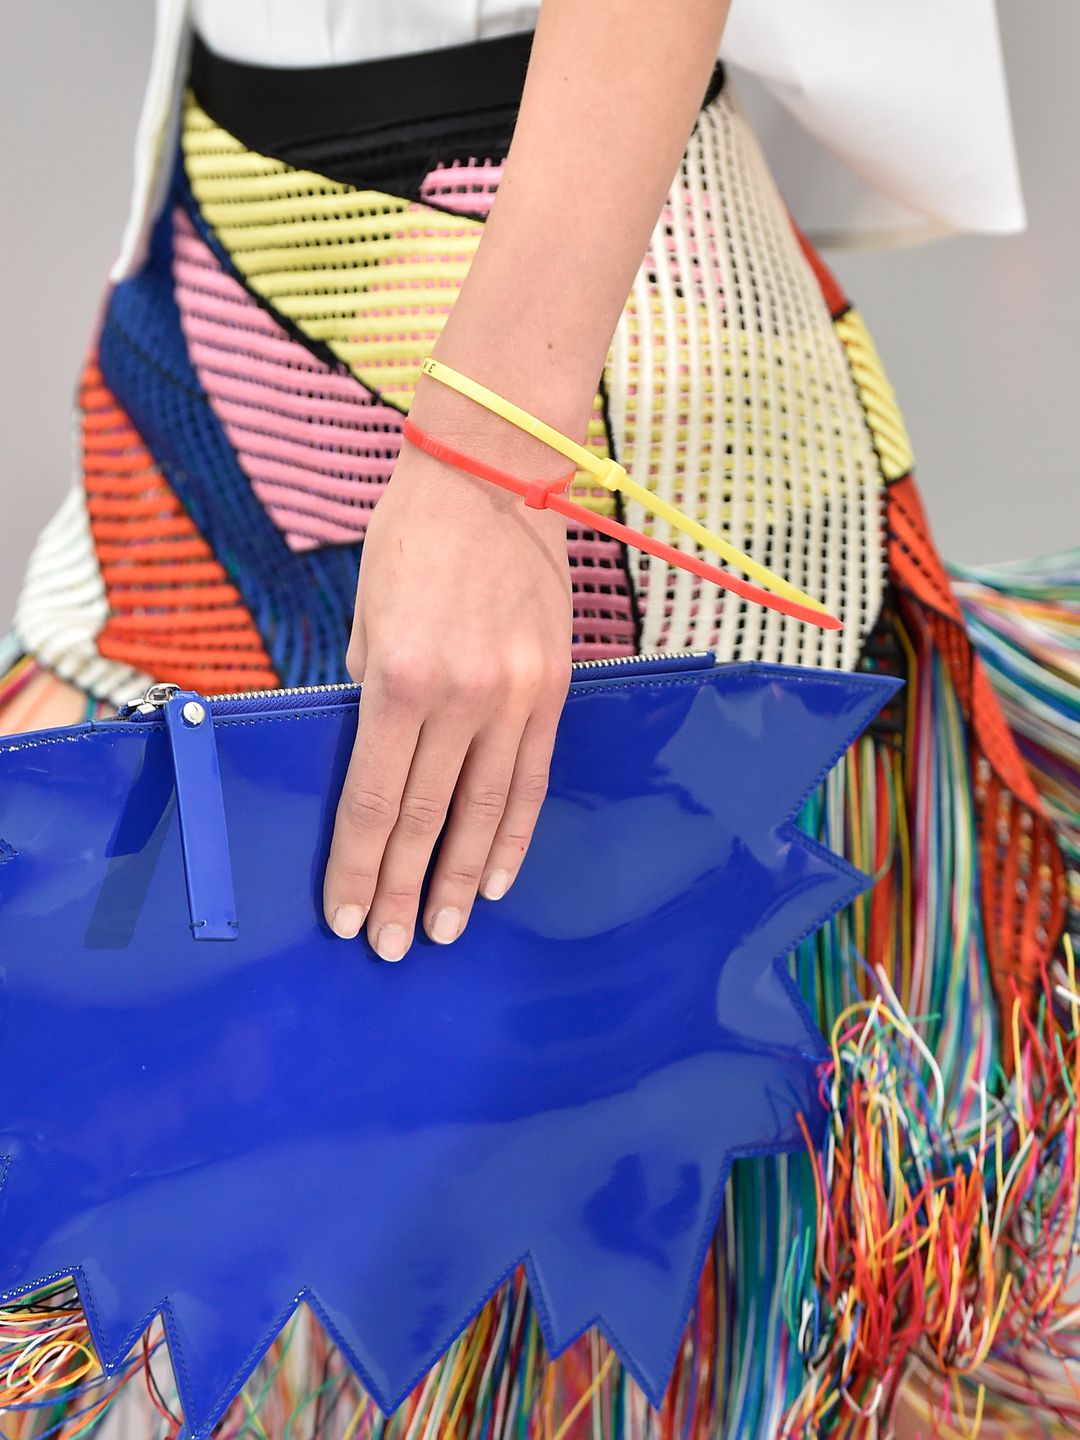 Neon yellow and orange cable ties are worn as bracelets on the Christopher Kane Spring Summer 2016 catwalk